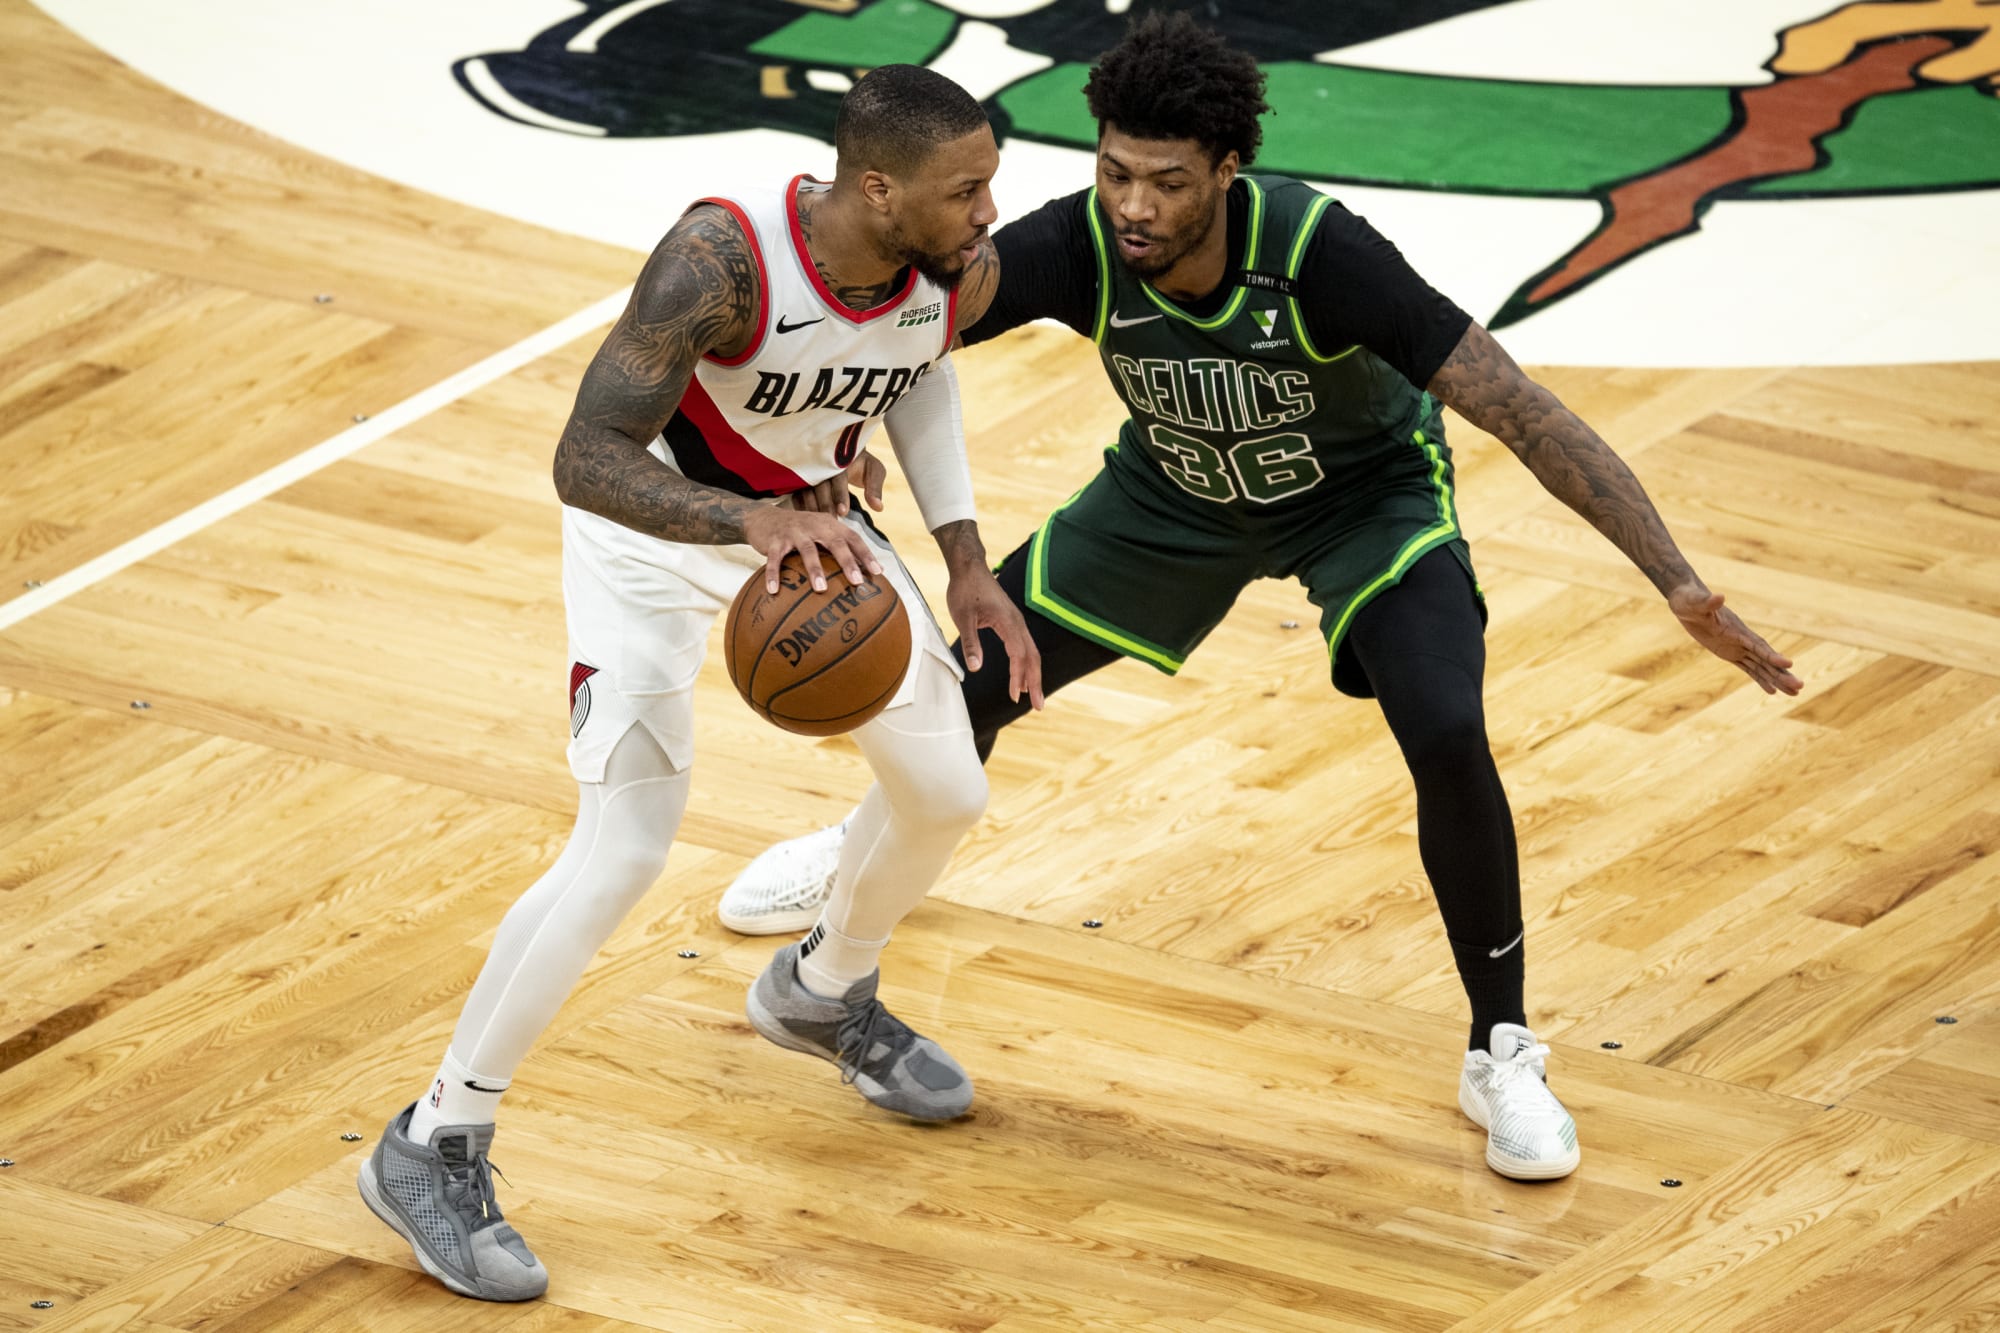 Boston Celtics Game Tonight Celtics vs Trail Blazers Injury Report, Starting Lineup, Predictions, TV Channel for March 8